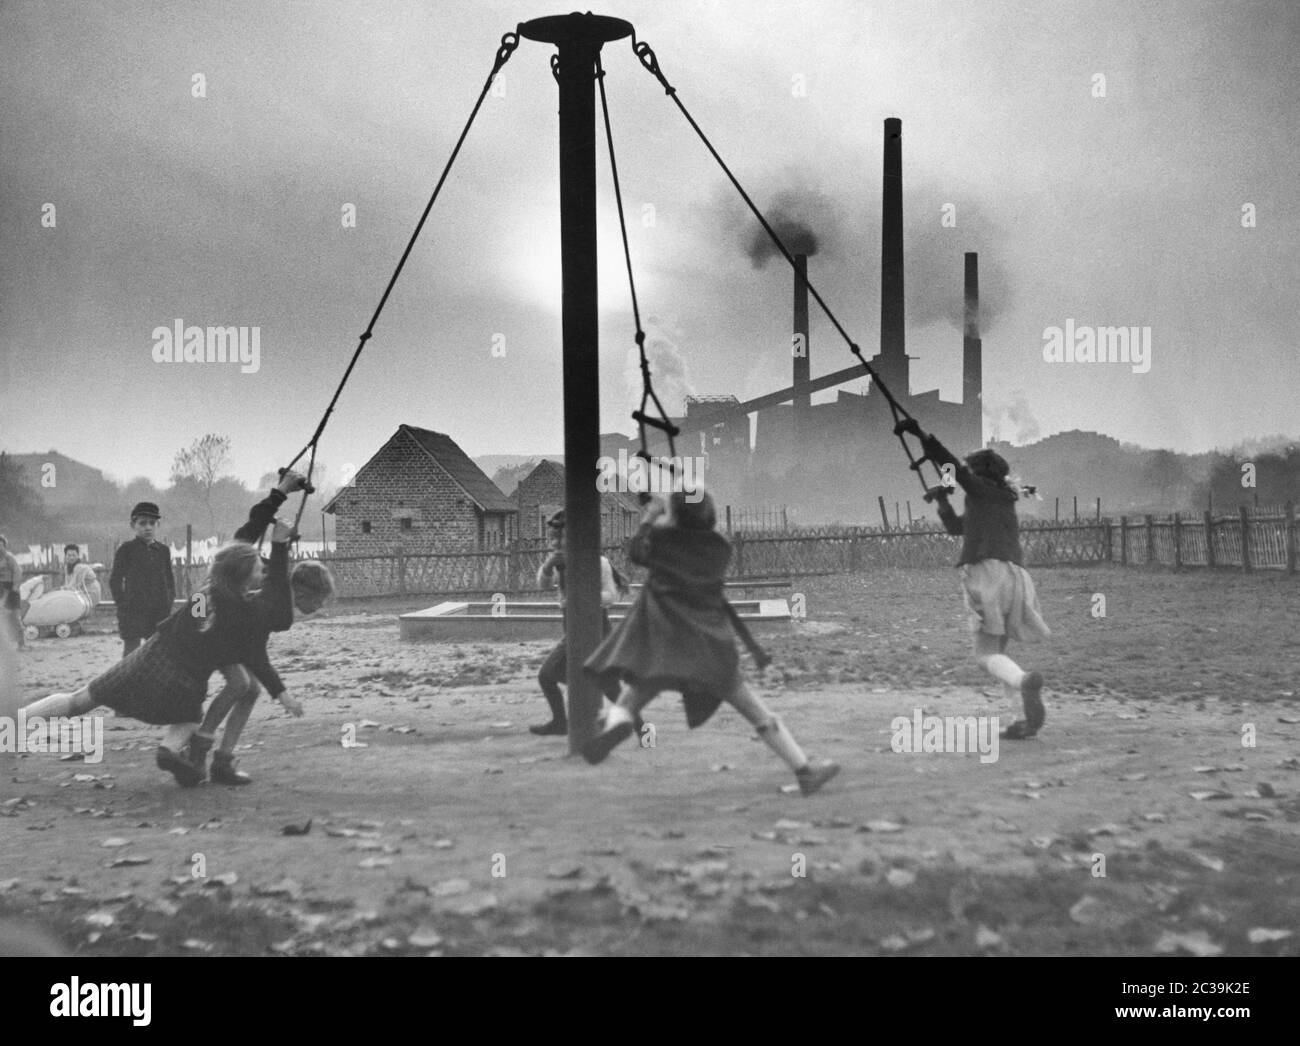 Children play on a playground in the Ruhr area. In the background, the chimneys and clouds of smoke of the industries. Stock Photo